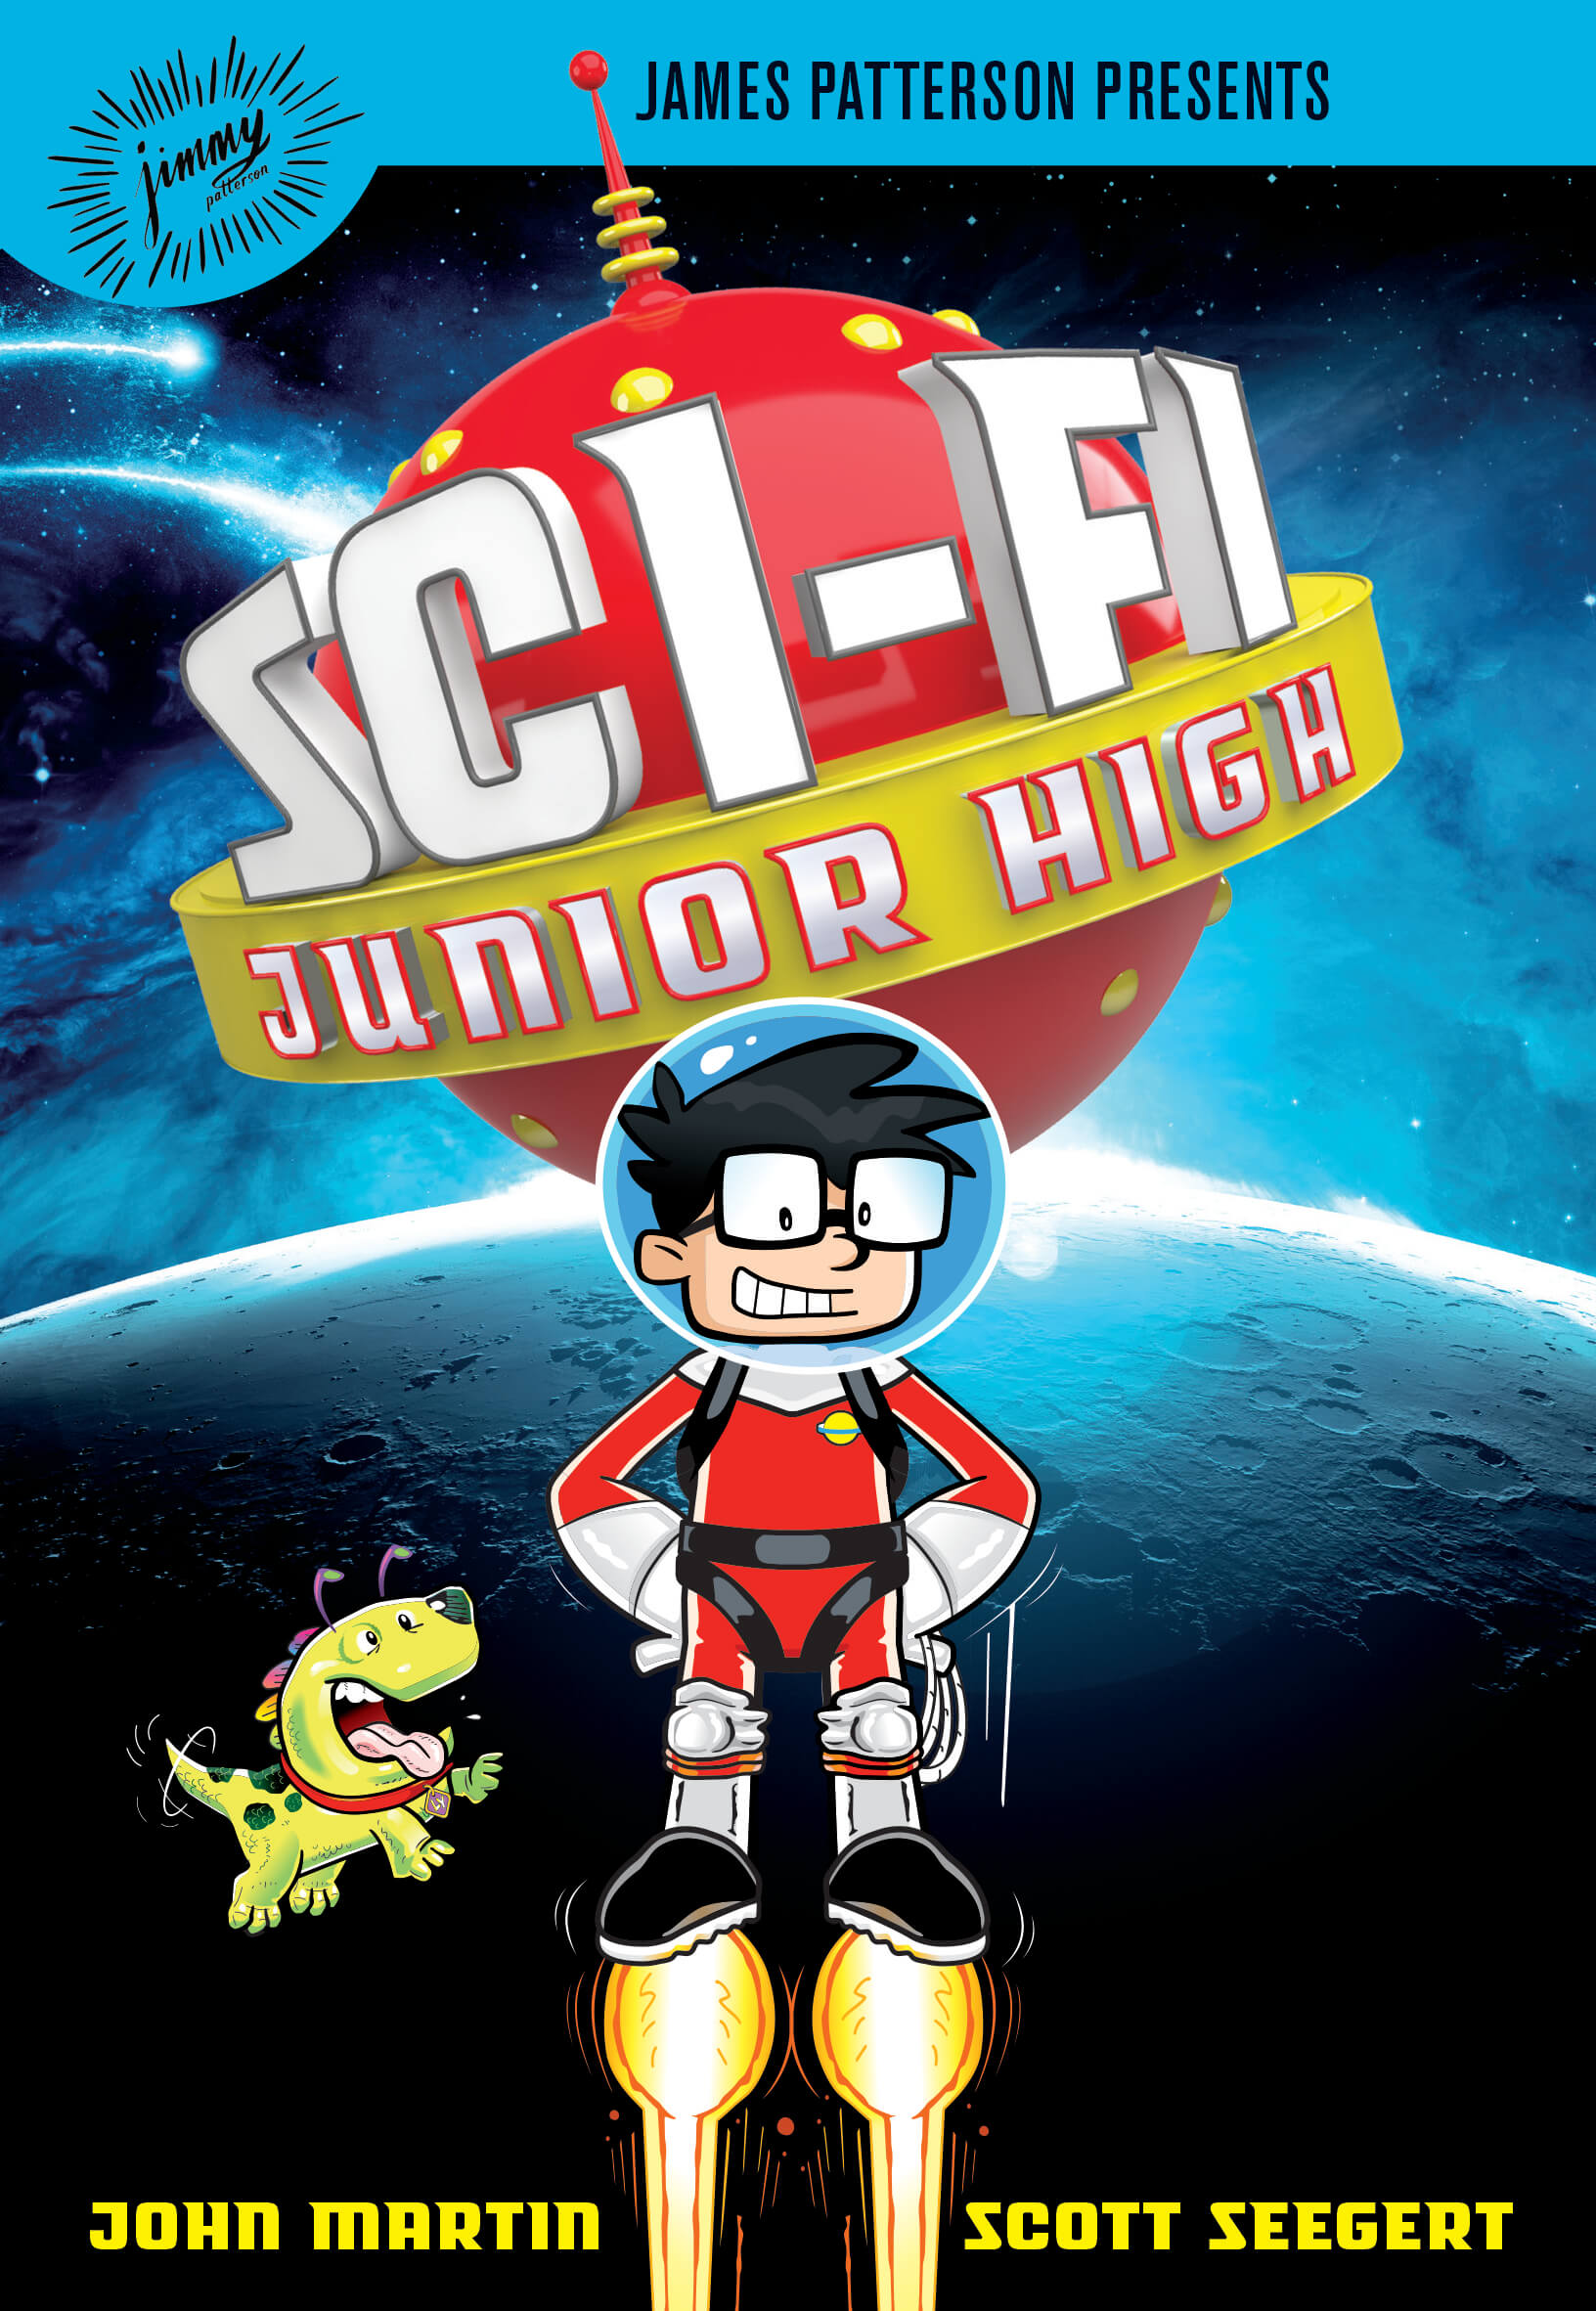 Sci-Fi Junior High is a new children's book and an out-of-this-world story about friendship, accepting our differences, and the fight against evil... bunnies. Yes, evil bunnies - don't ask.